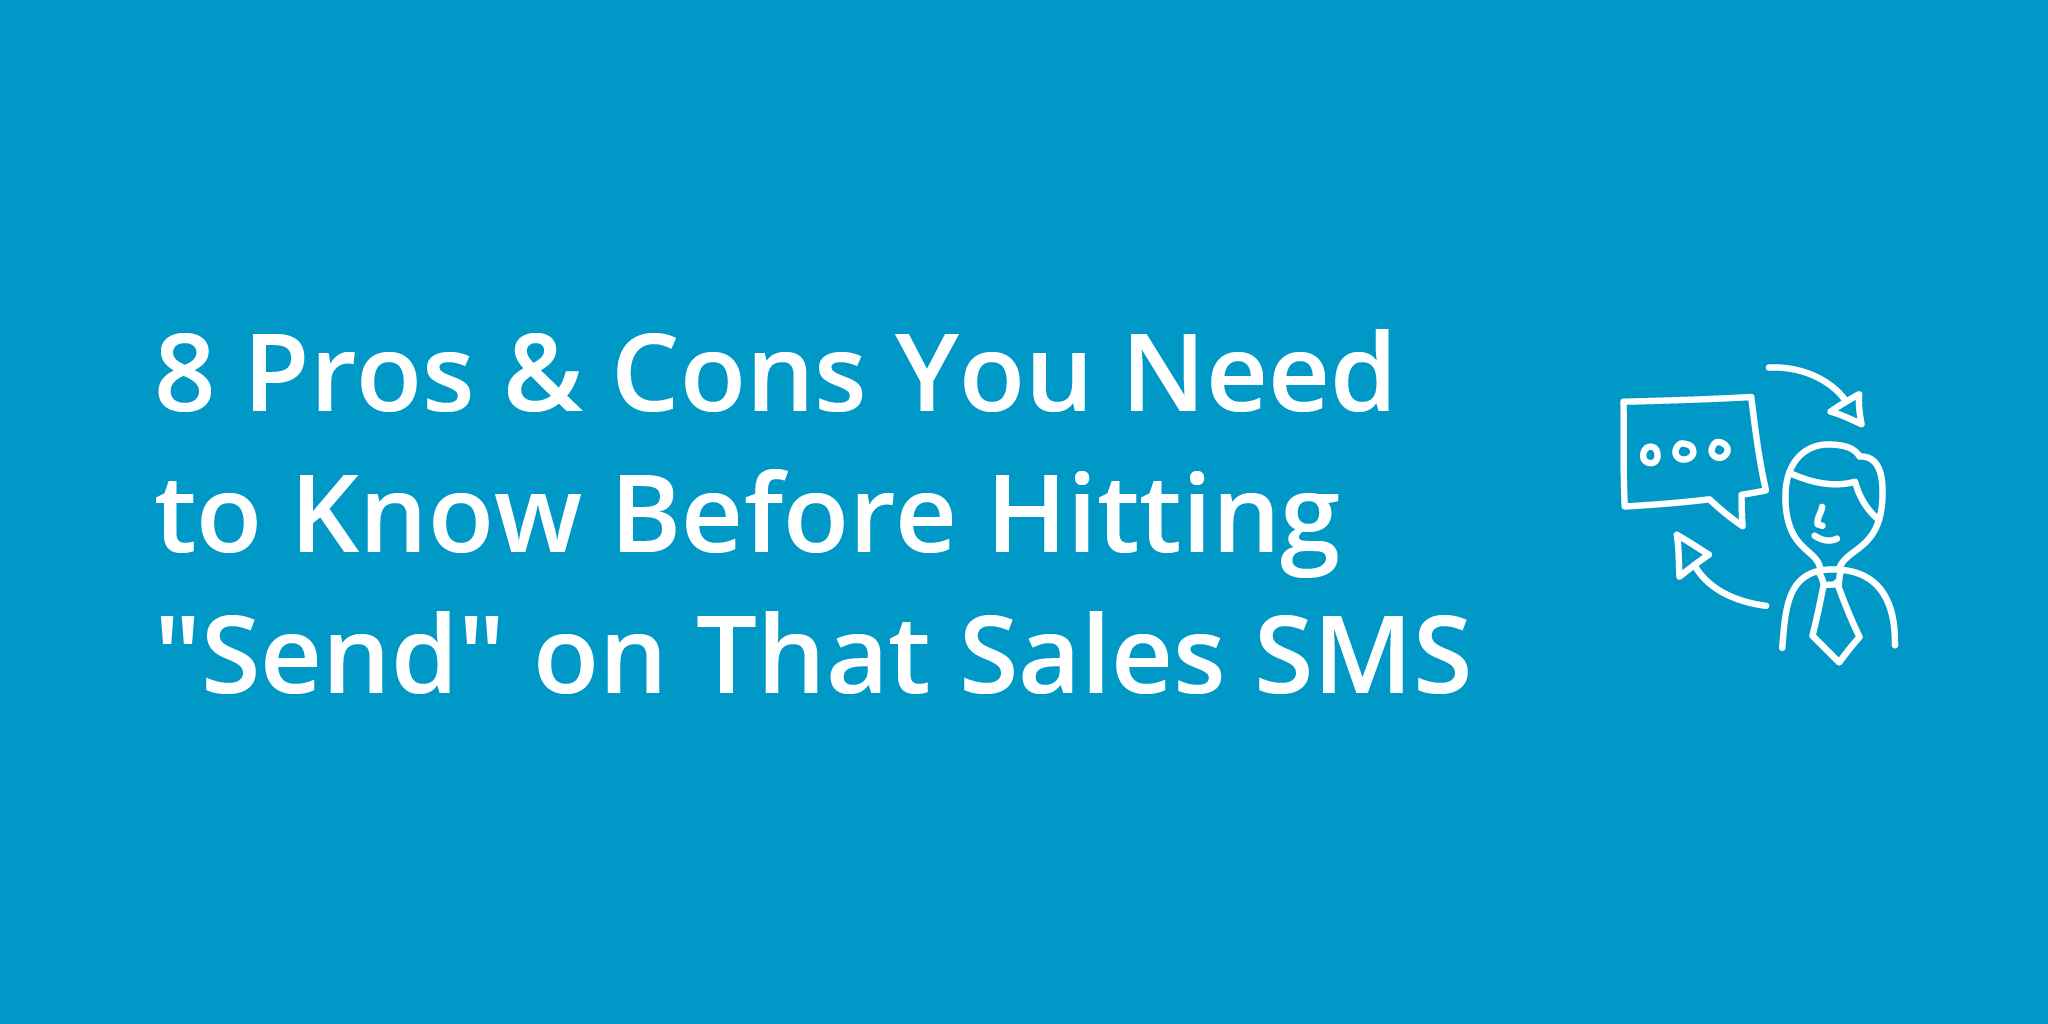 8 Pros & Cons You Need to Know Before Hitting "Send" on That Sales SMS | Telephones for business